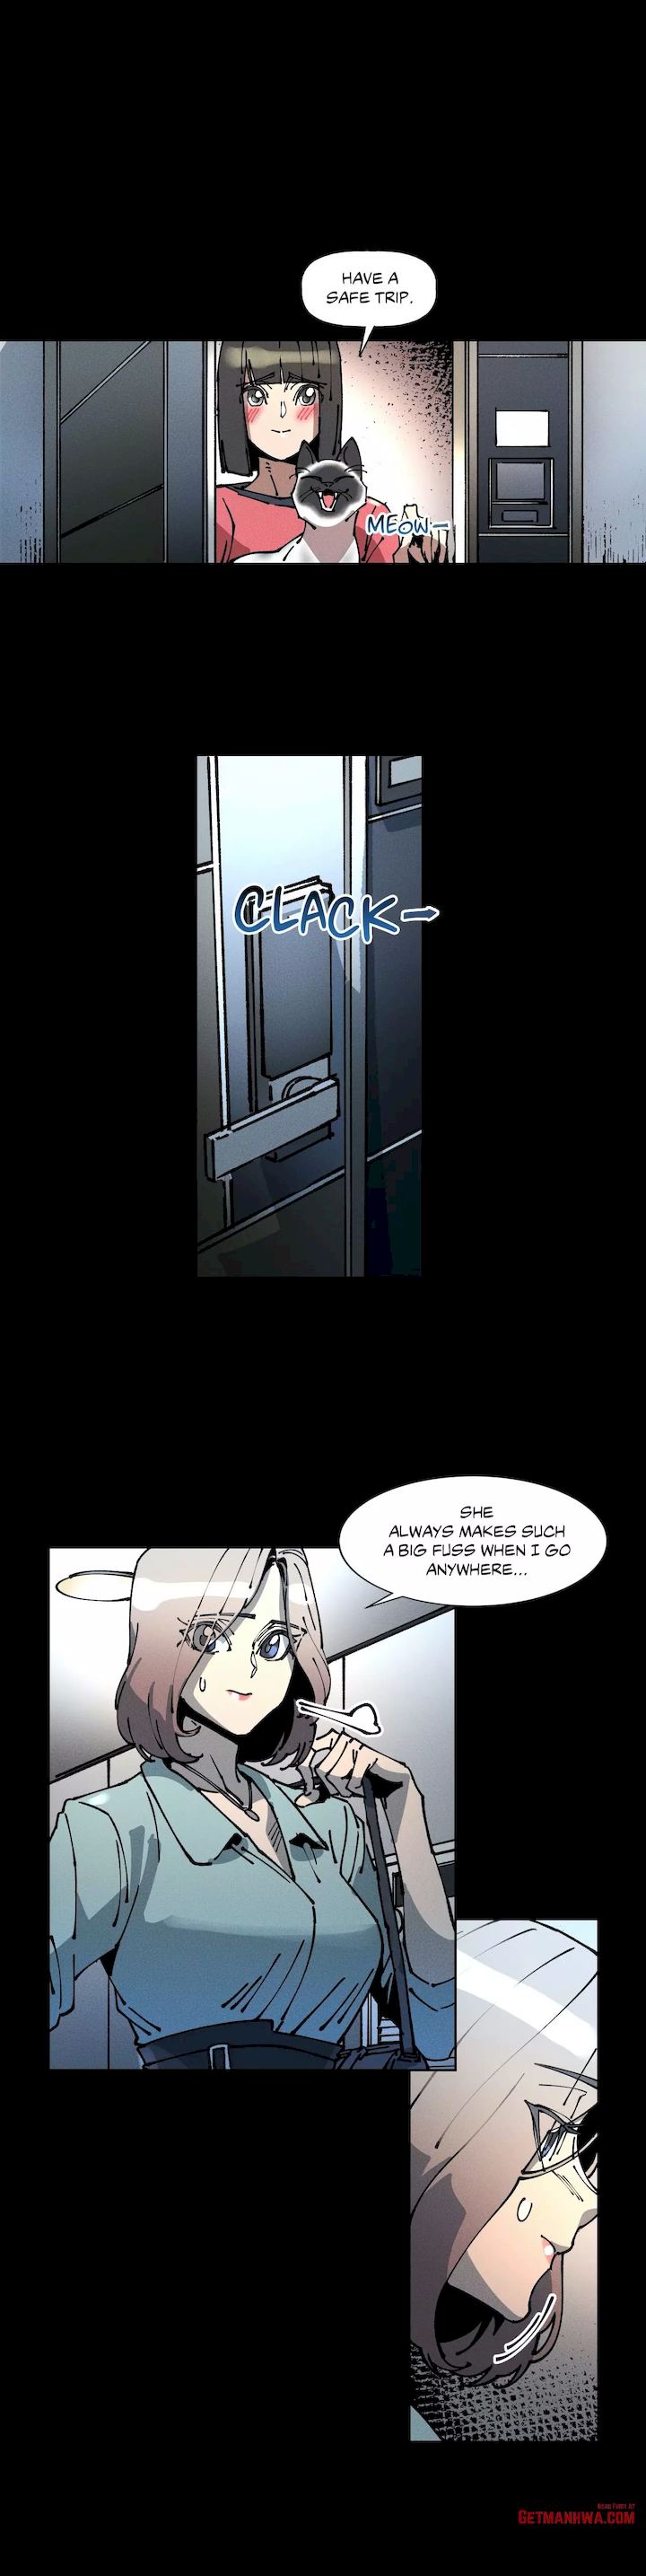 White Angels Get No Rest - Chapter 42 Page 4